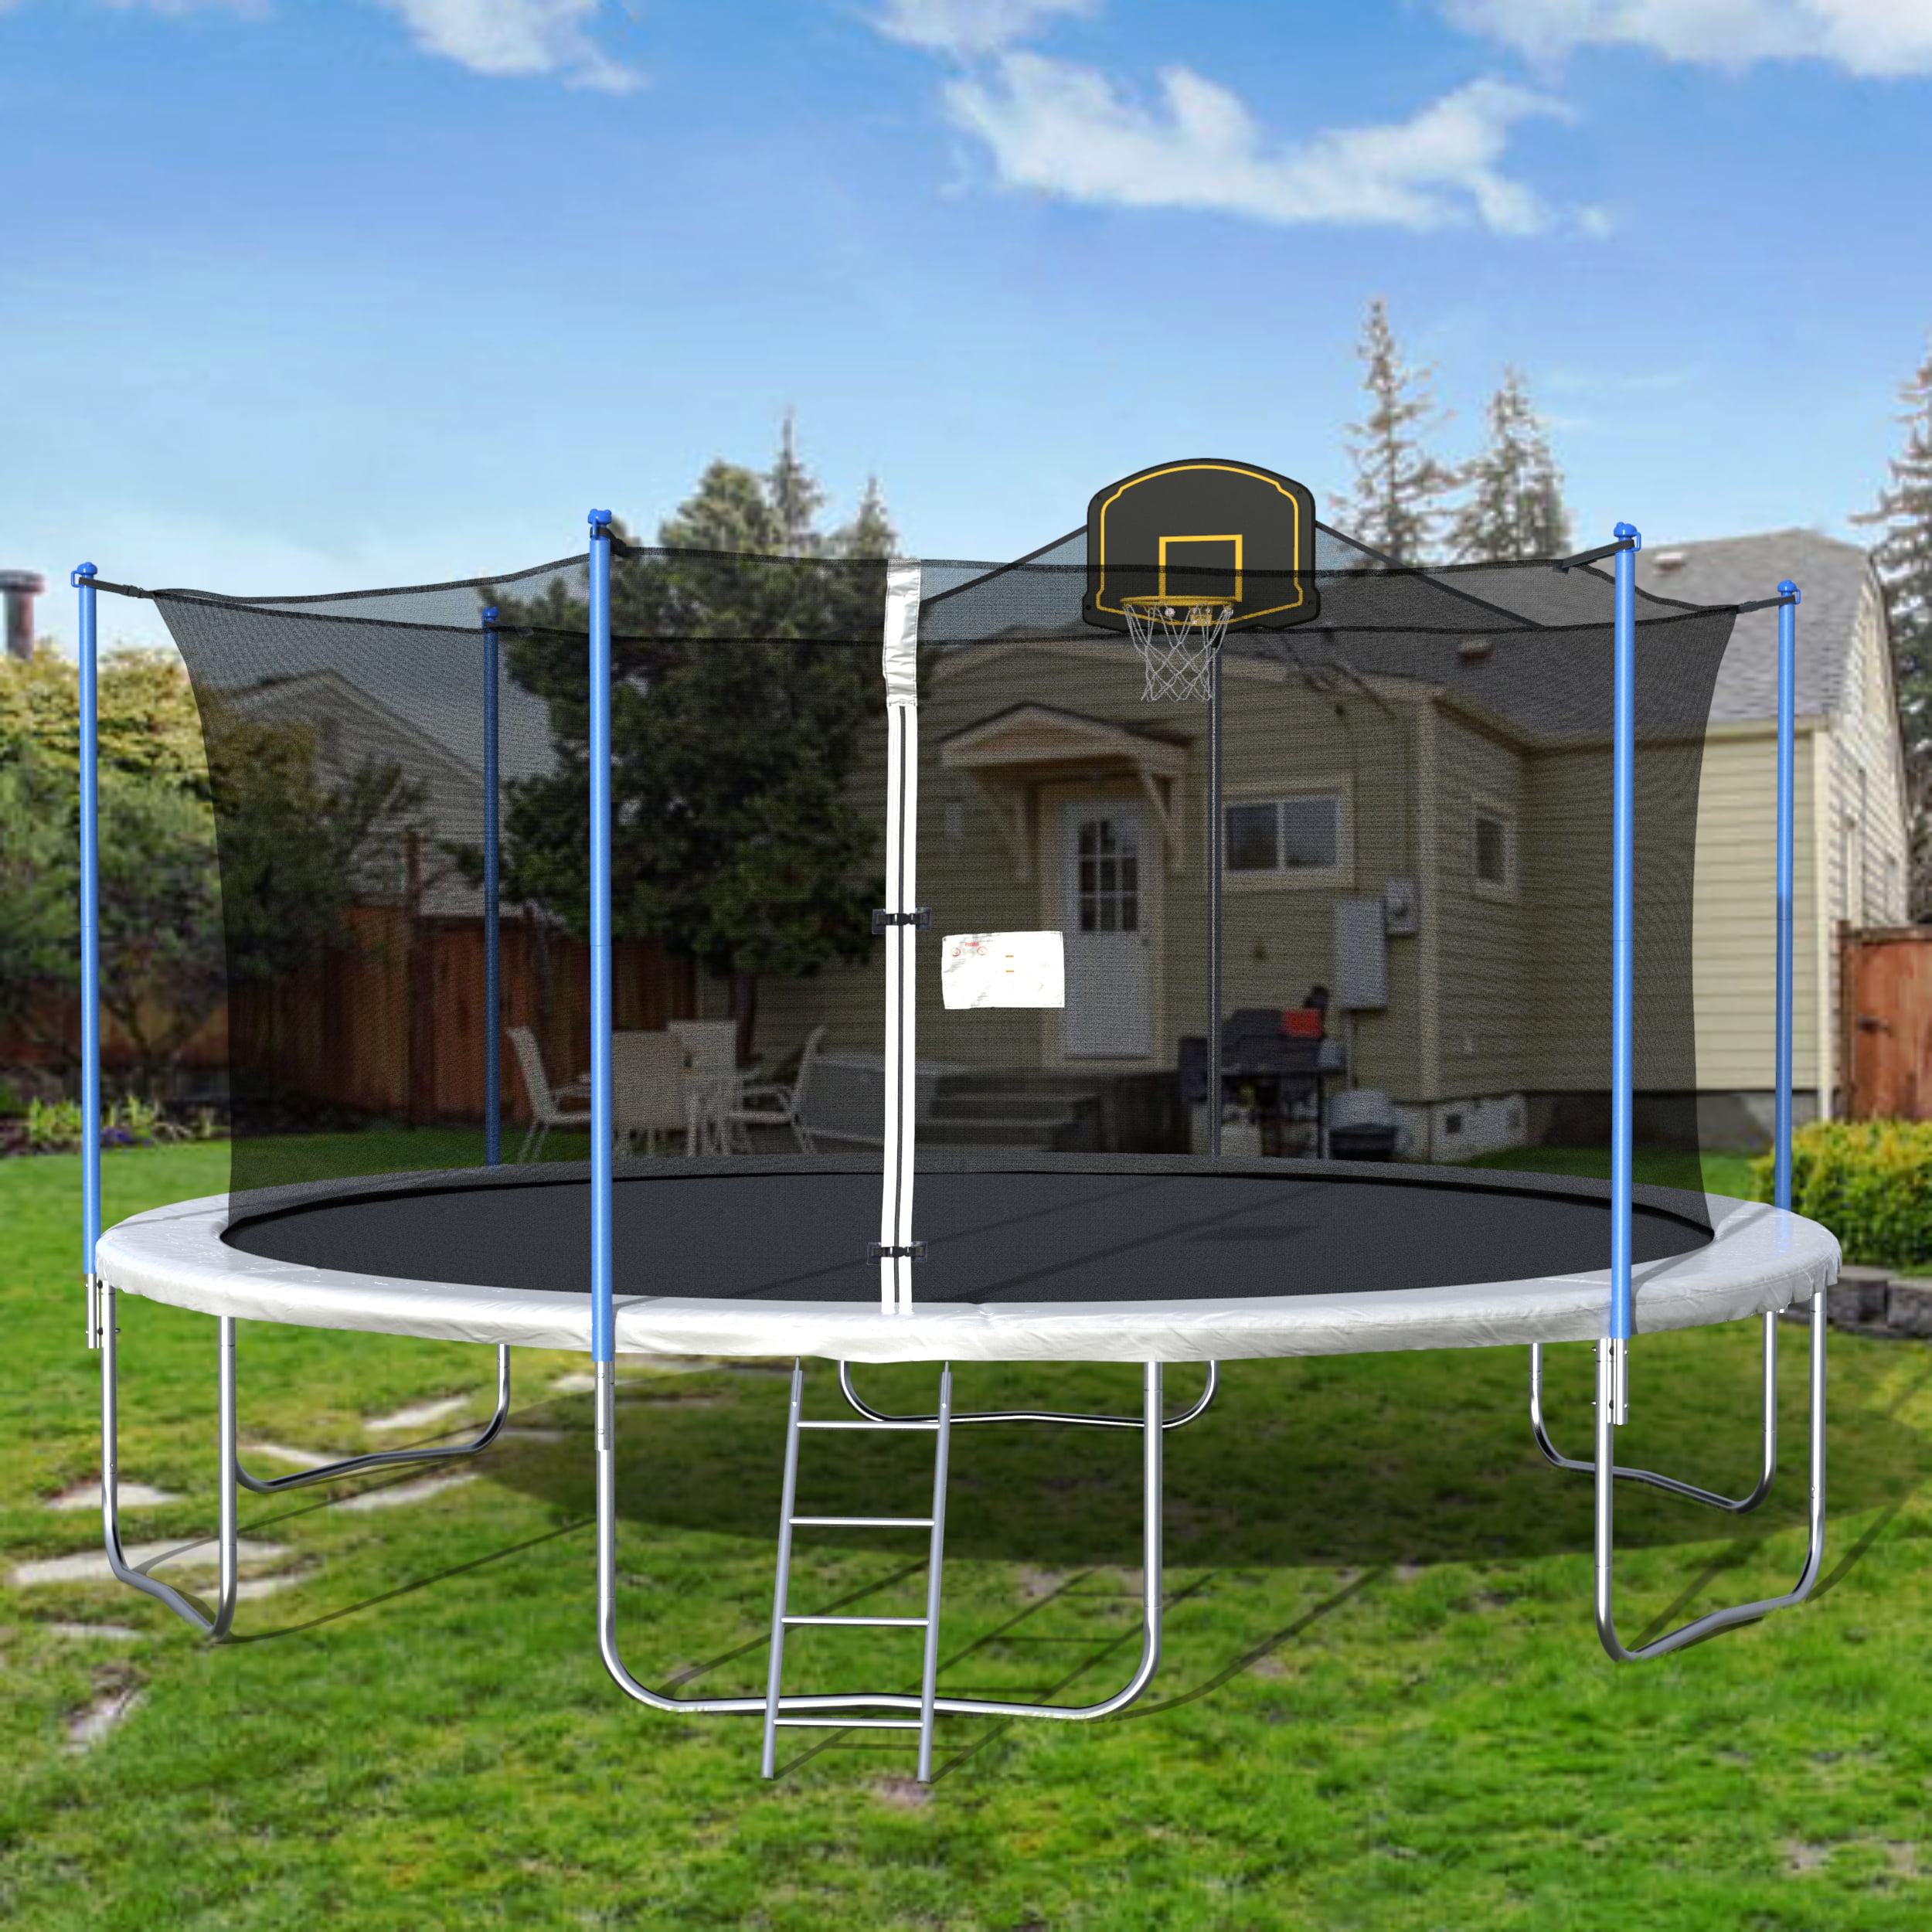 Clearance! Outdoor Trampoline with Basketball Hoop, 16 FT Kids Trampoline with Safety Enclosure Net and Ladder, Round Trampoline Set, Bounce Jump Trampoline for Family School Play Entertainment, W9039